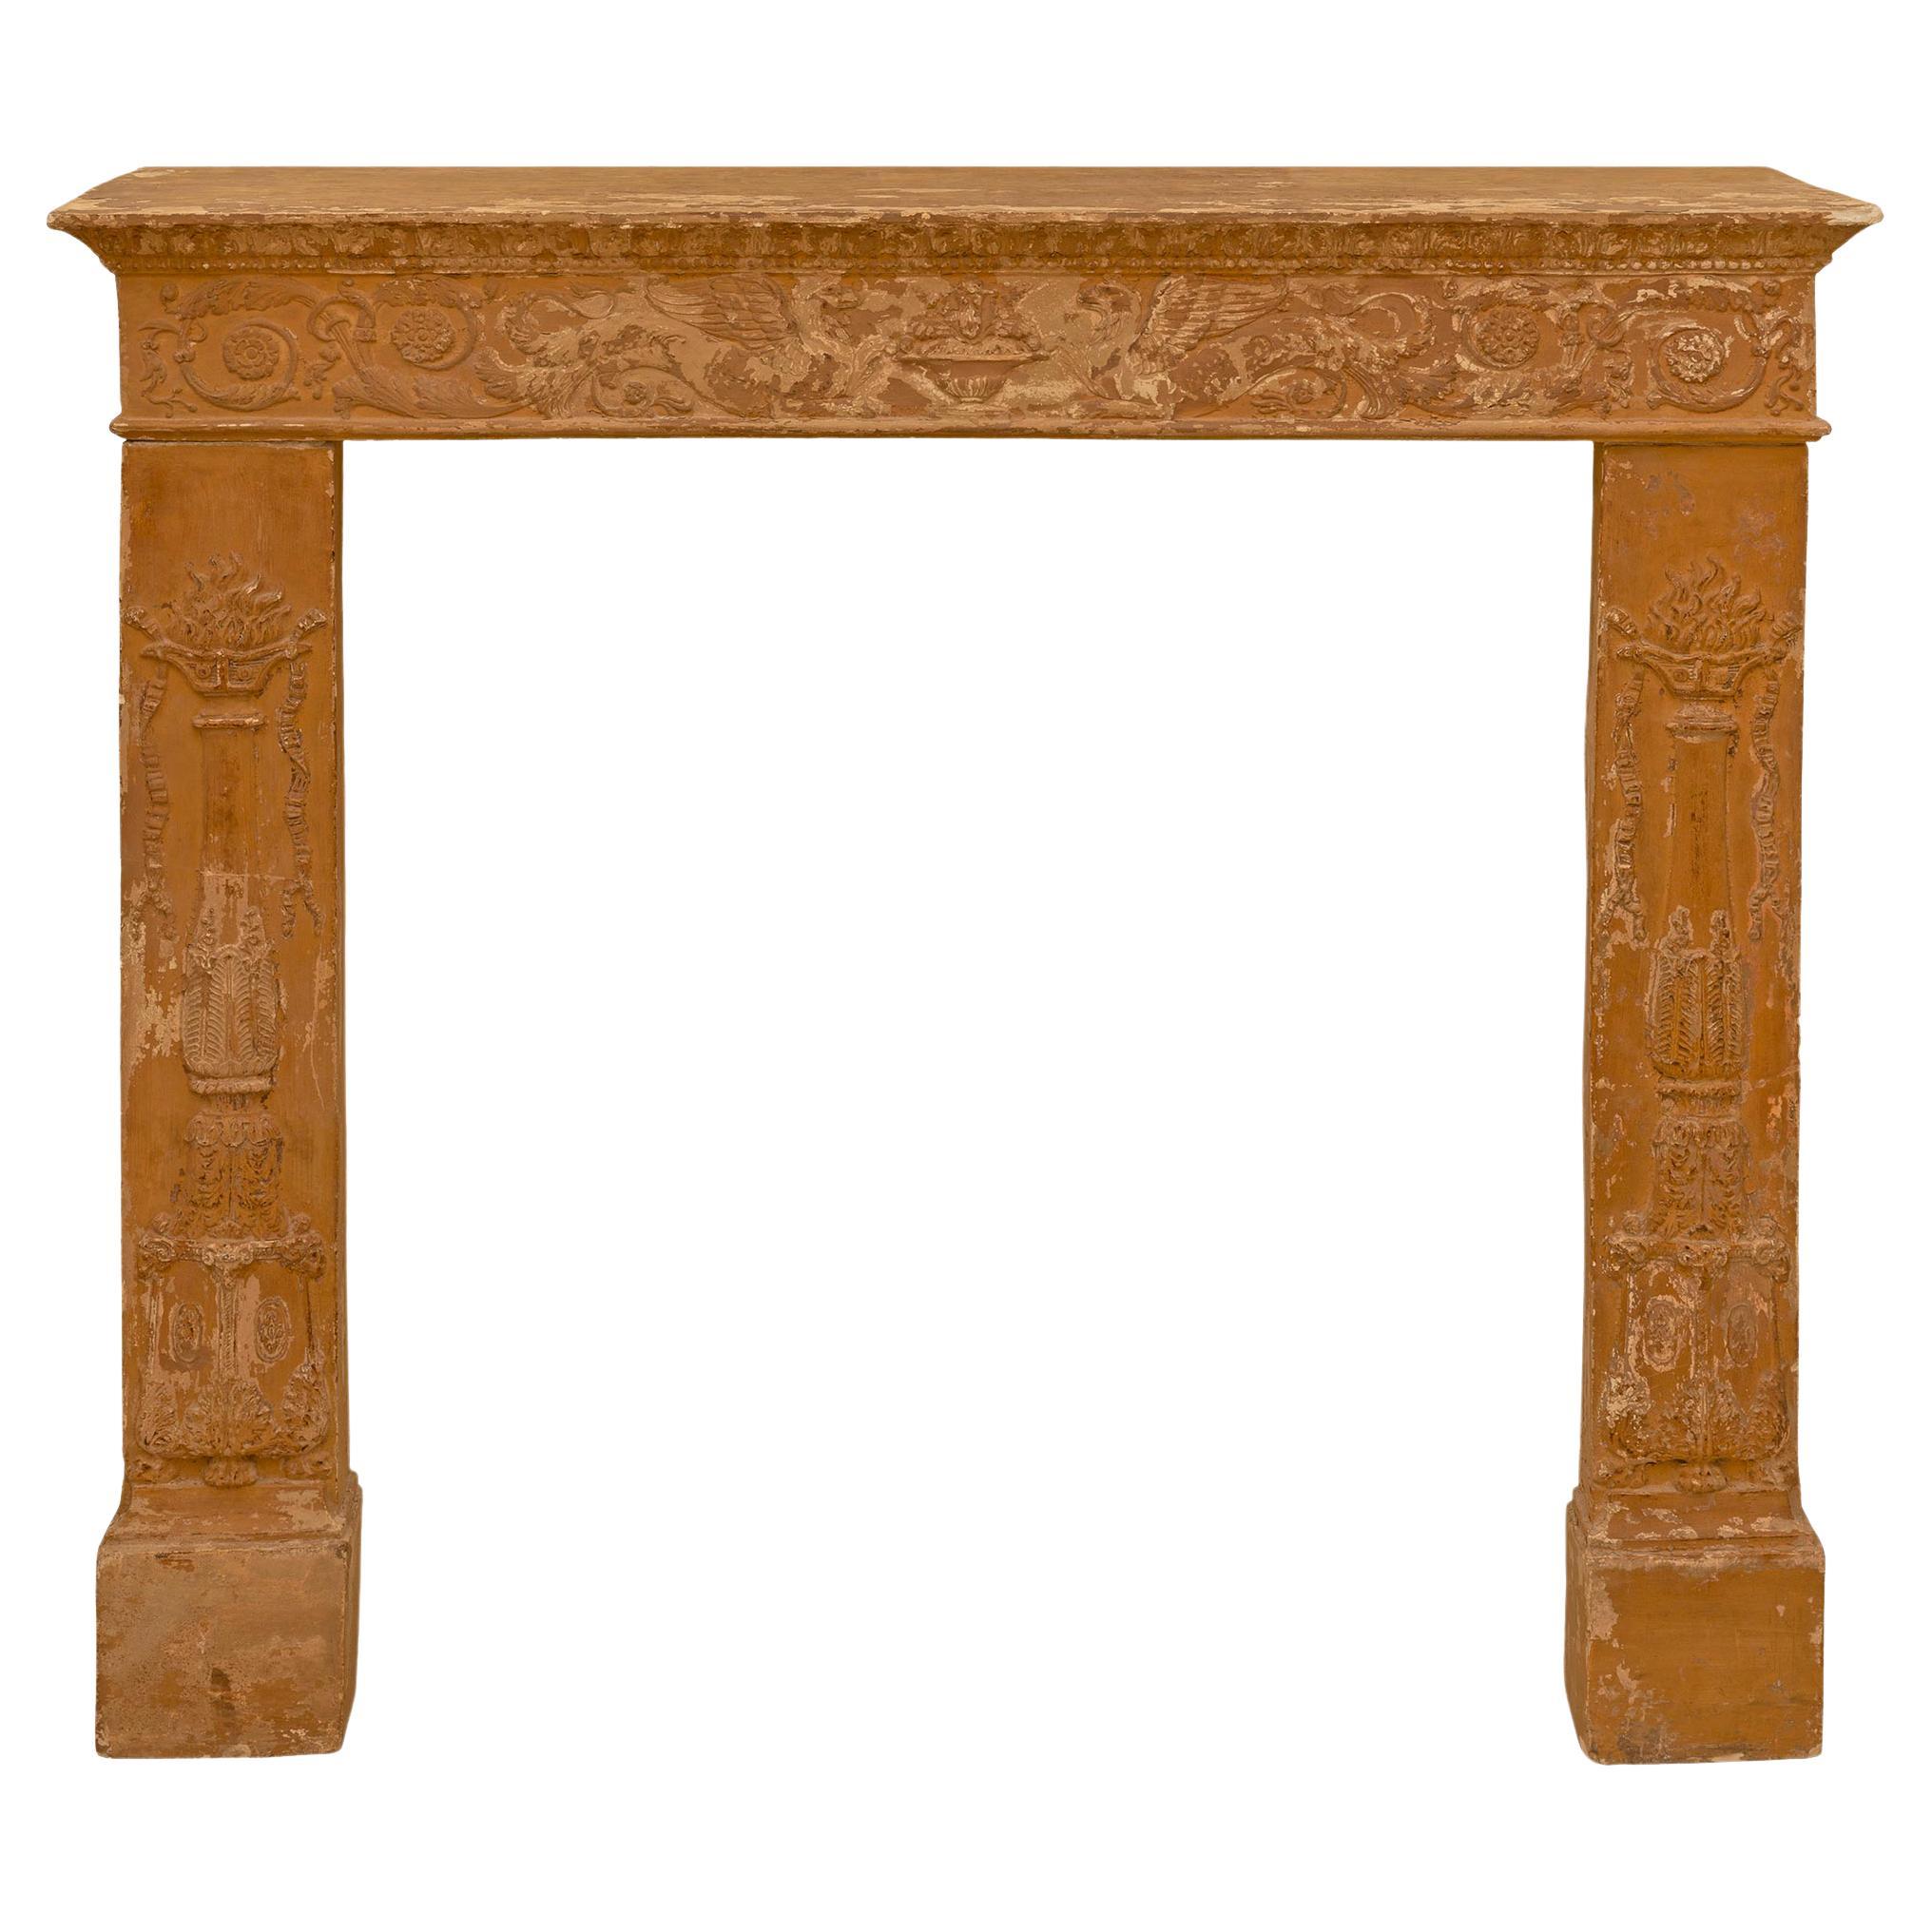 French Early 19th Century First Empire Period Terracotta Fireplace Mantel For Sale